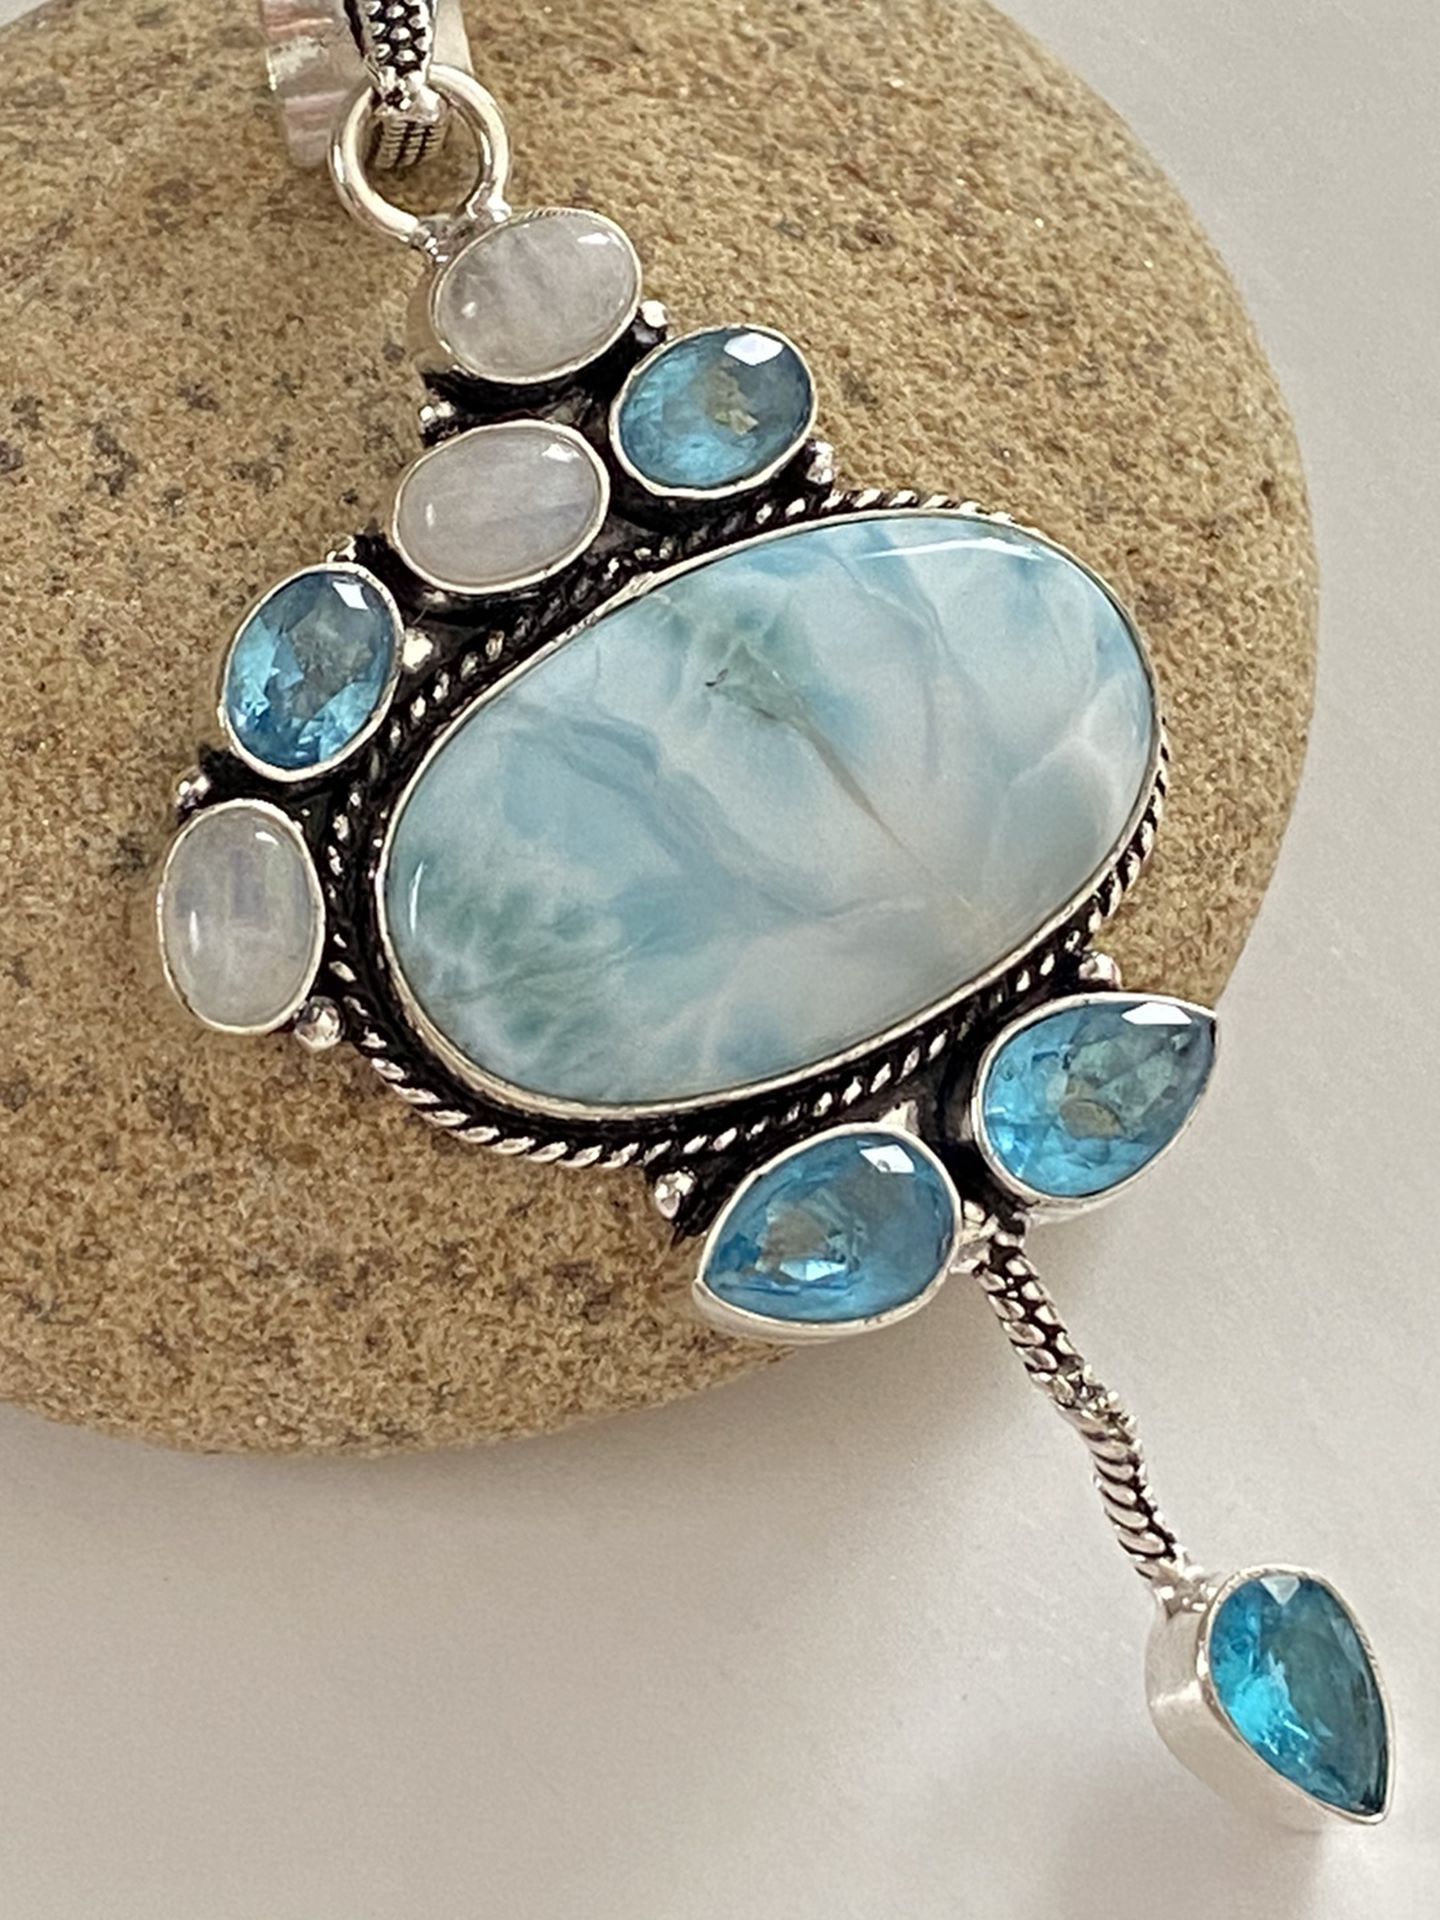 Stunning handcrafted caribbean larimar, moonstone and blue topaz 925 sterling silver overlay pendant